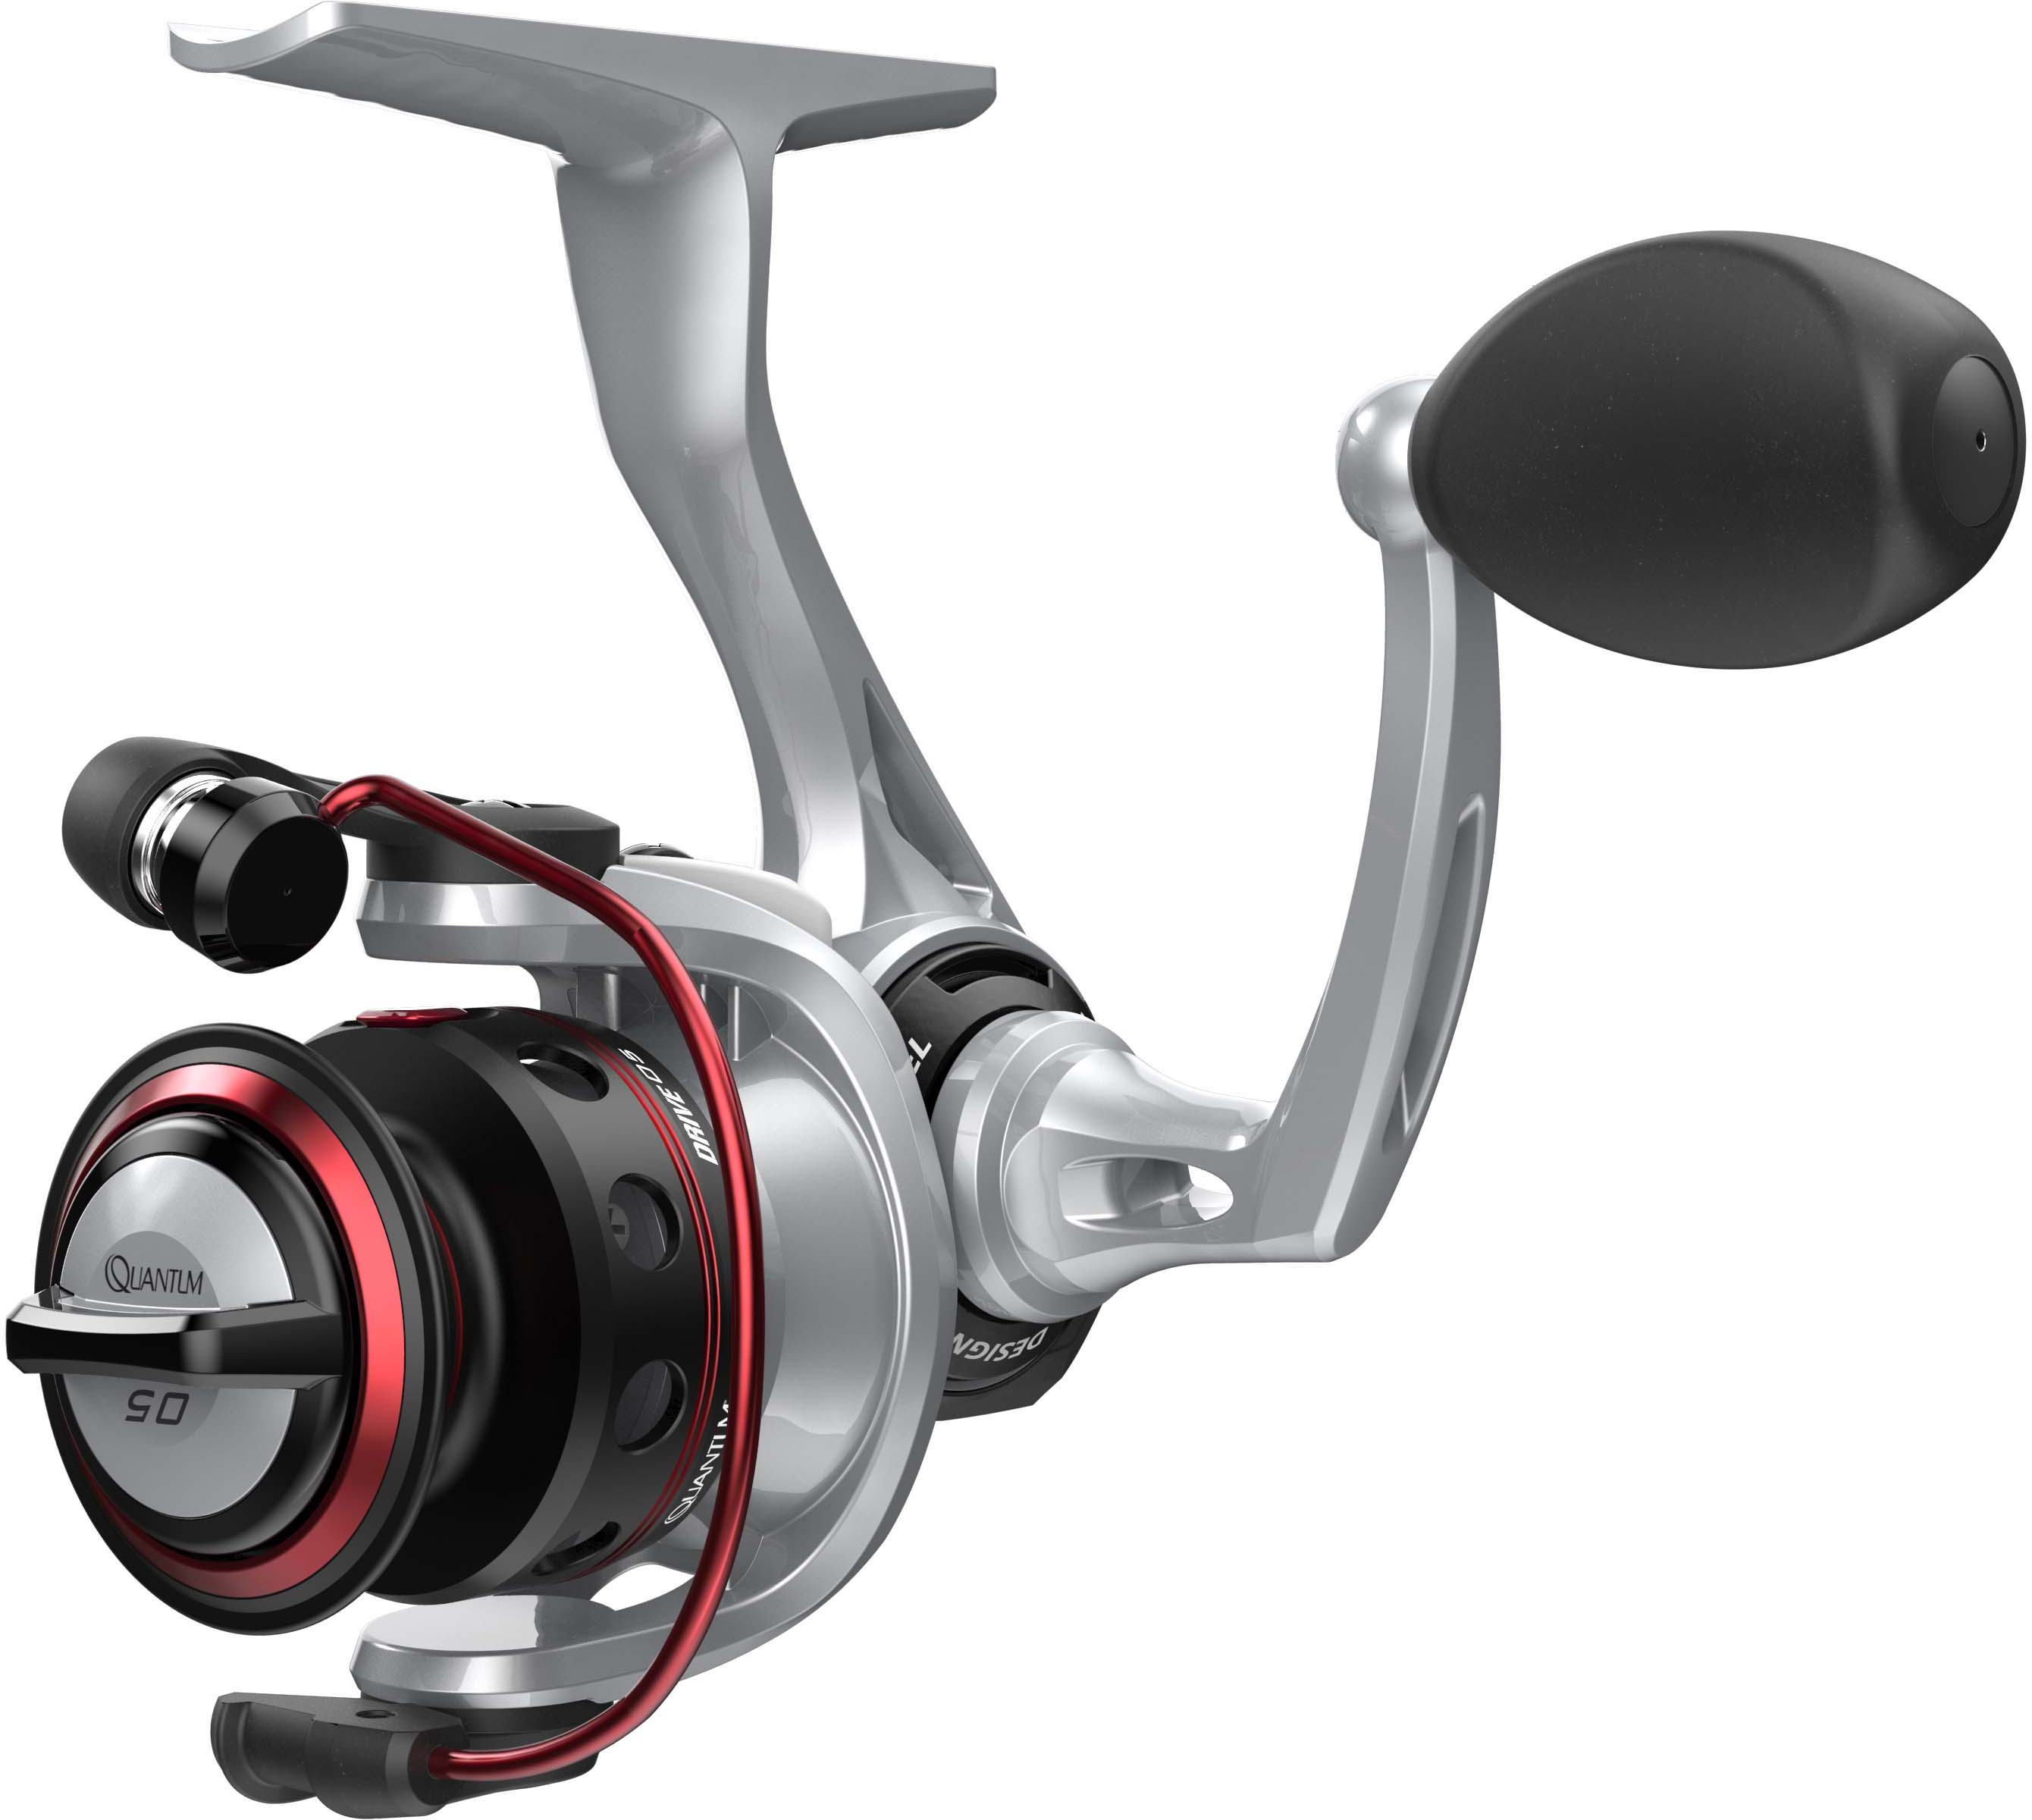 https://op2.0ps.us/original/opplanet-quantum-drive-spinning-fishing-reel-5-size-ambidextrous-dr05-bx3-main